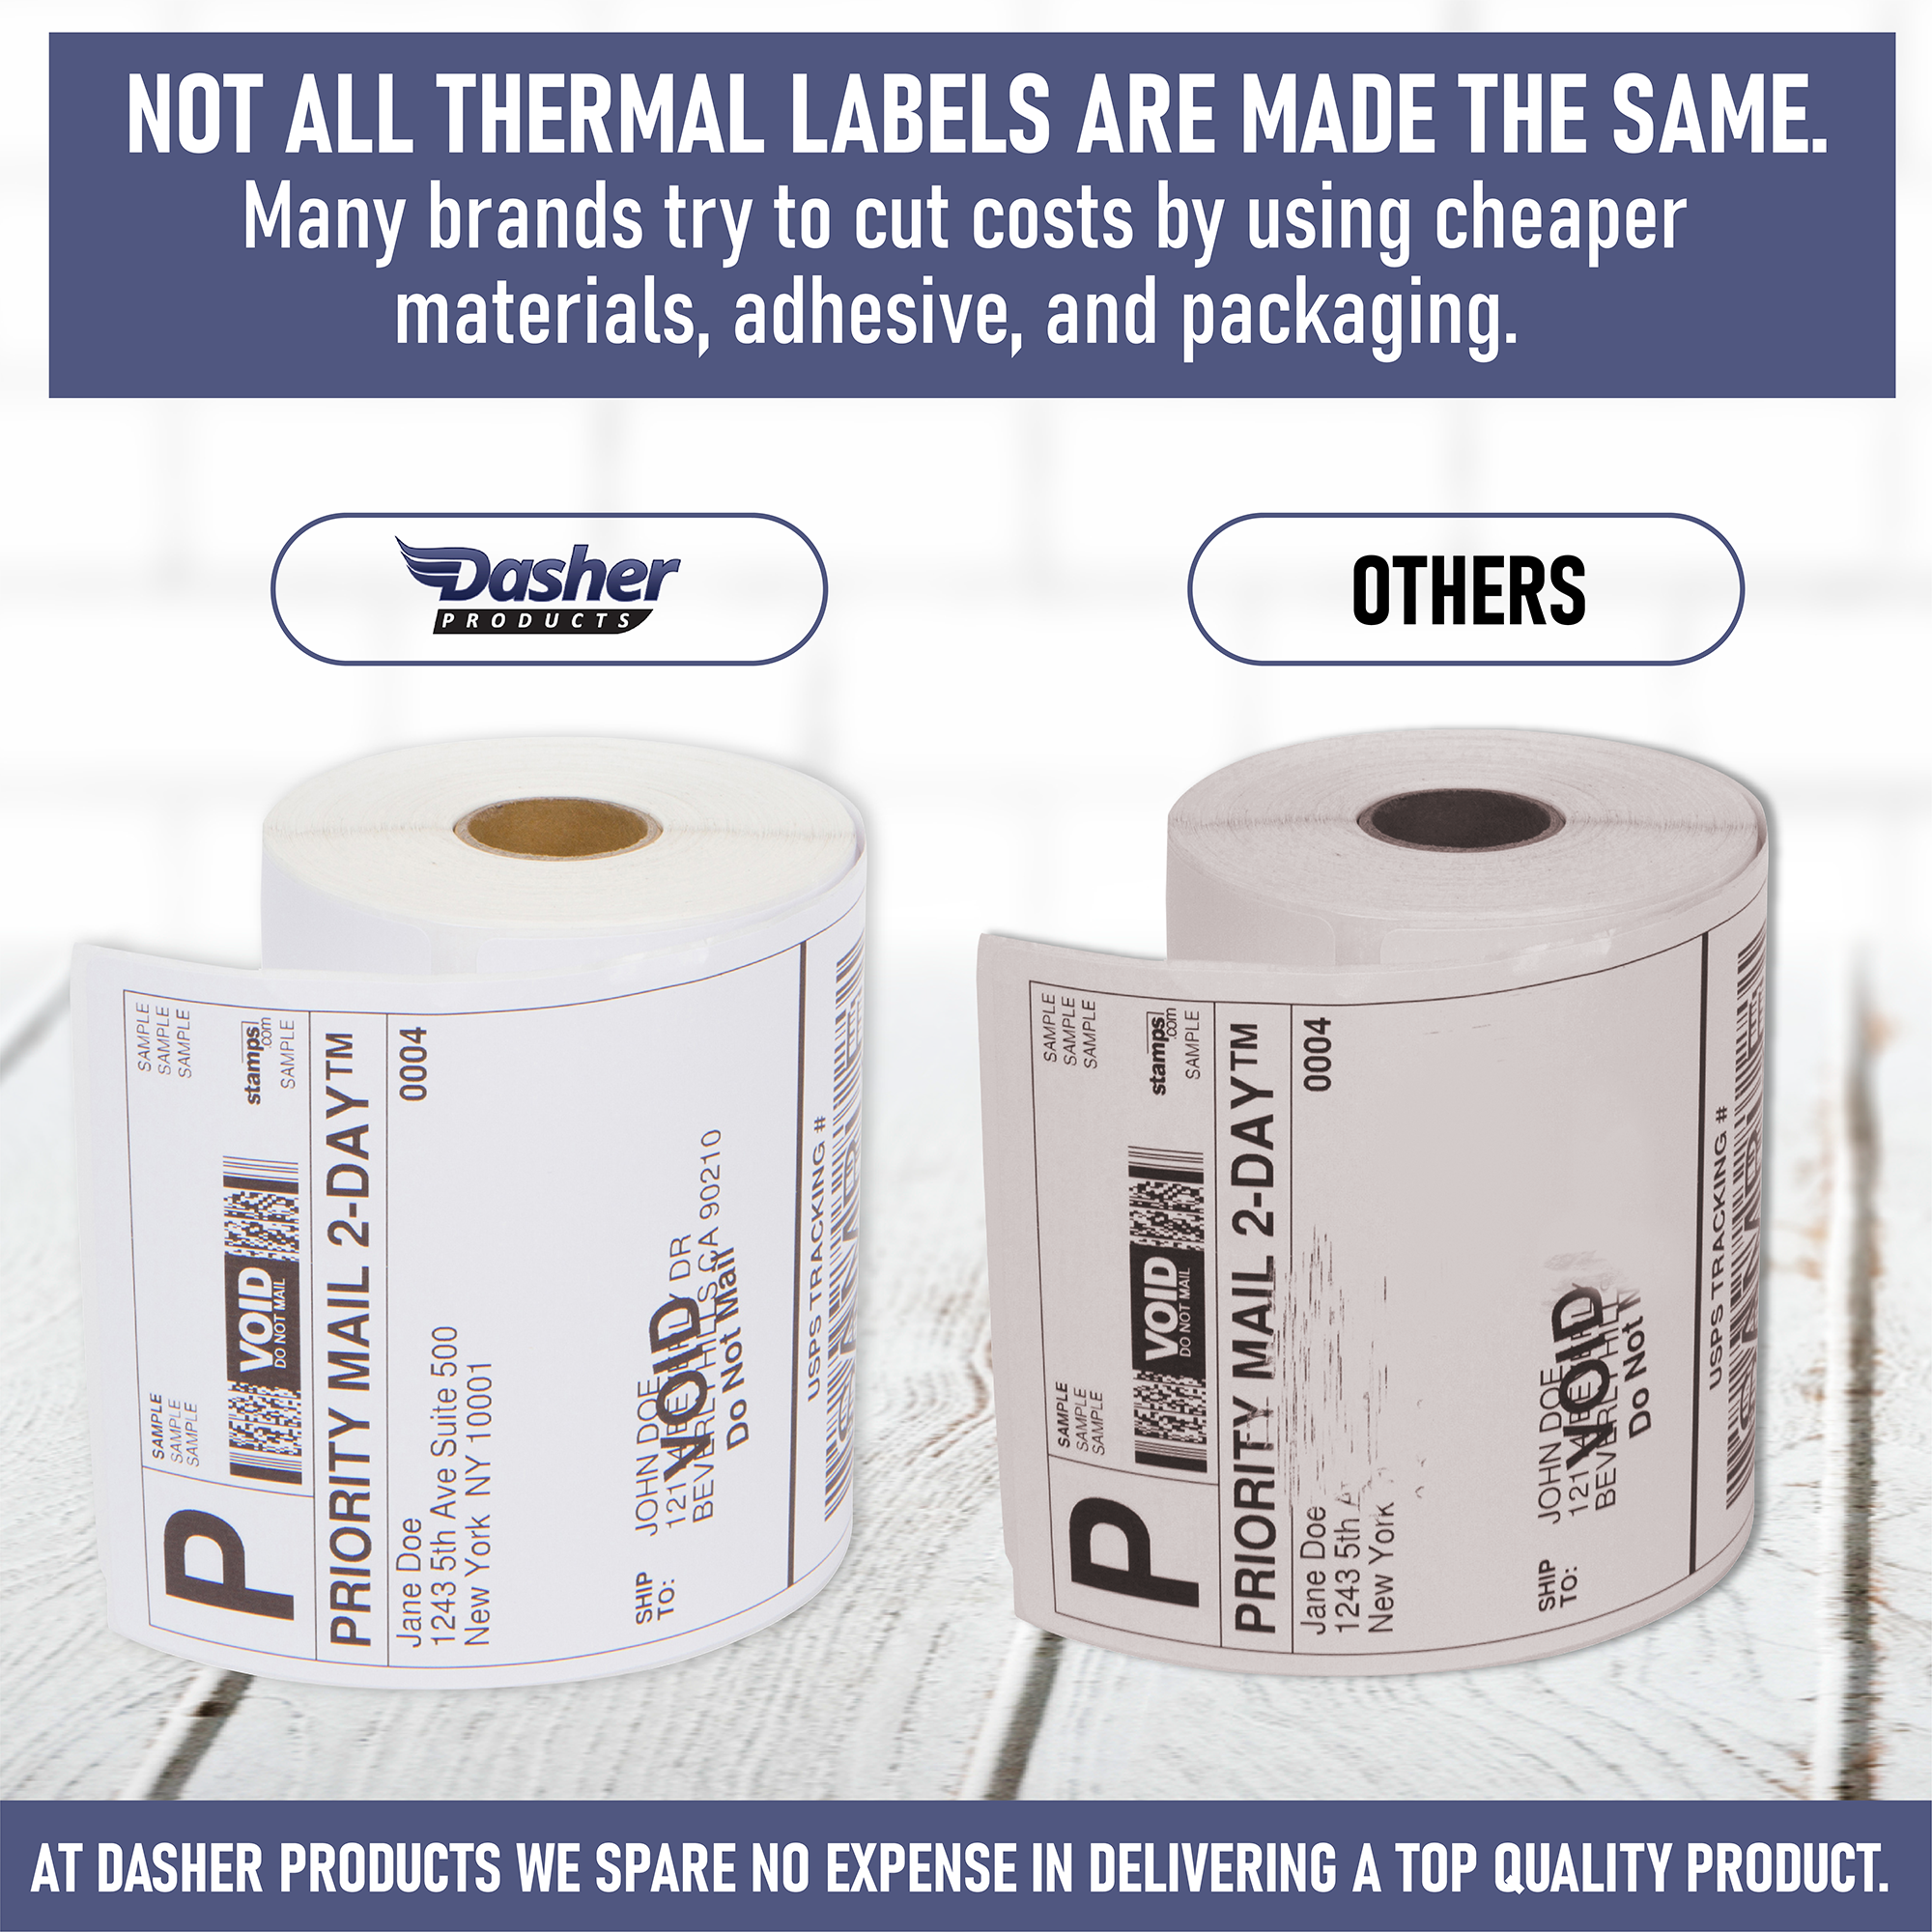 ONYX Products® 4 x 6 1/4 DYMO Compatible Shipping Label Rolls, 250 Labels/Roll  – Stamps.com Supplies Store